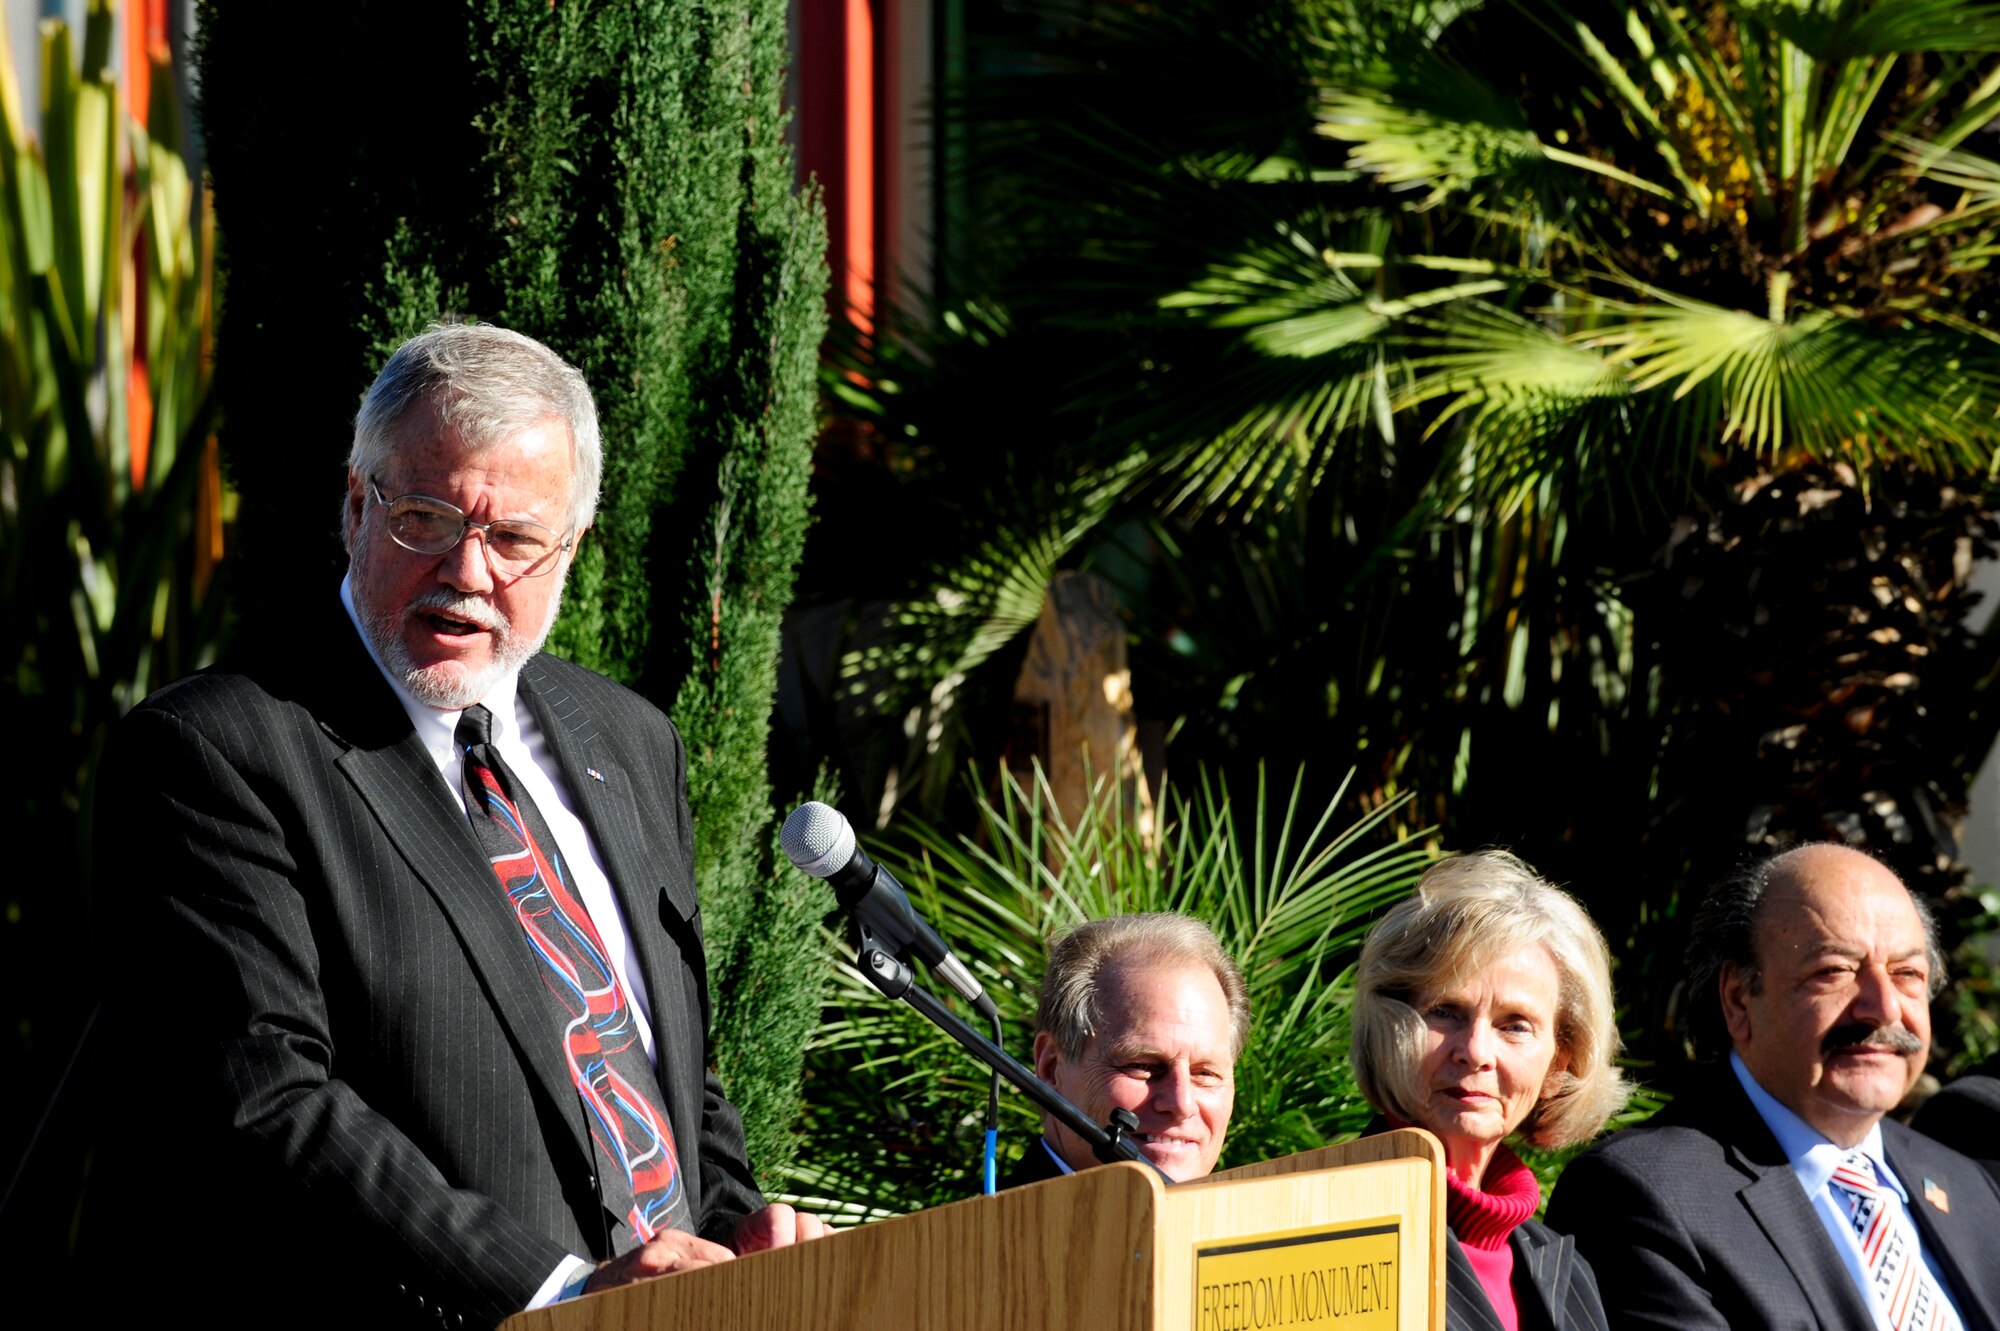 SANTA MARIA, Calif. – Bob Hatch, Santa Maria Valley Chamber of Commerce president and CEO, speaks as the keynote speaker during the Vandenberg Air Force Base Monument Dedication here Friday, Dec. 7, 2012. The event included keynote speeches from prominent members of the community, base Honor Guard flag presentation, and the unveiling of the VAFB Monument. (U.S. Air Force photo/Senior Airman Lael Huss)